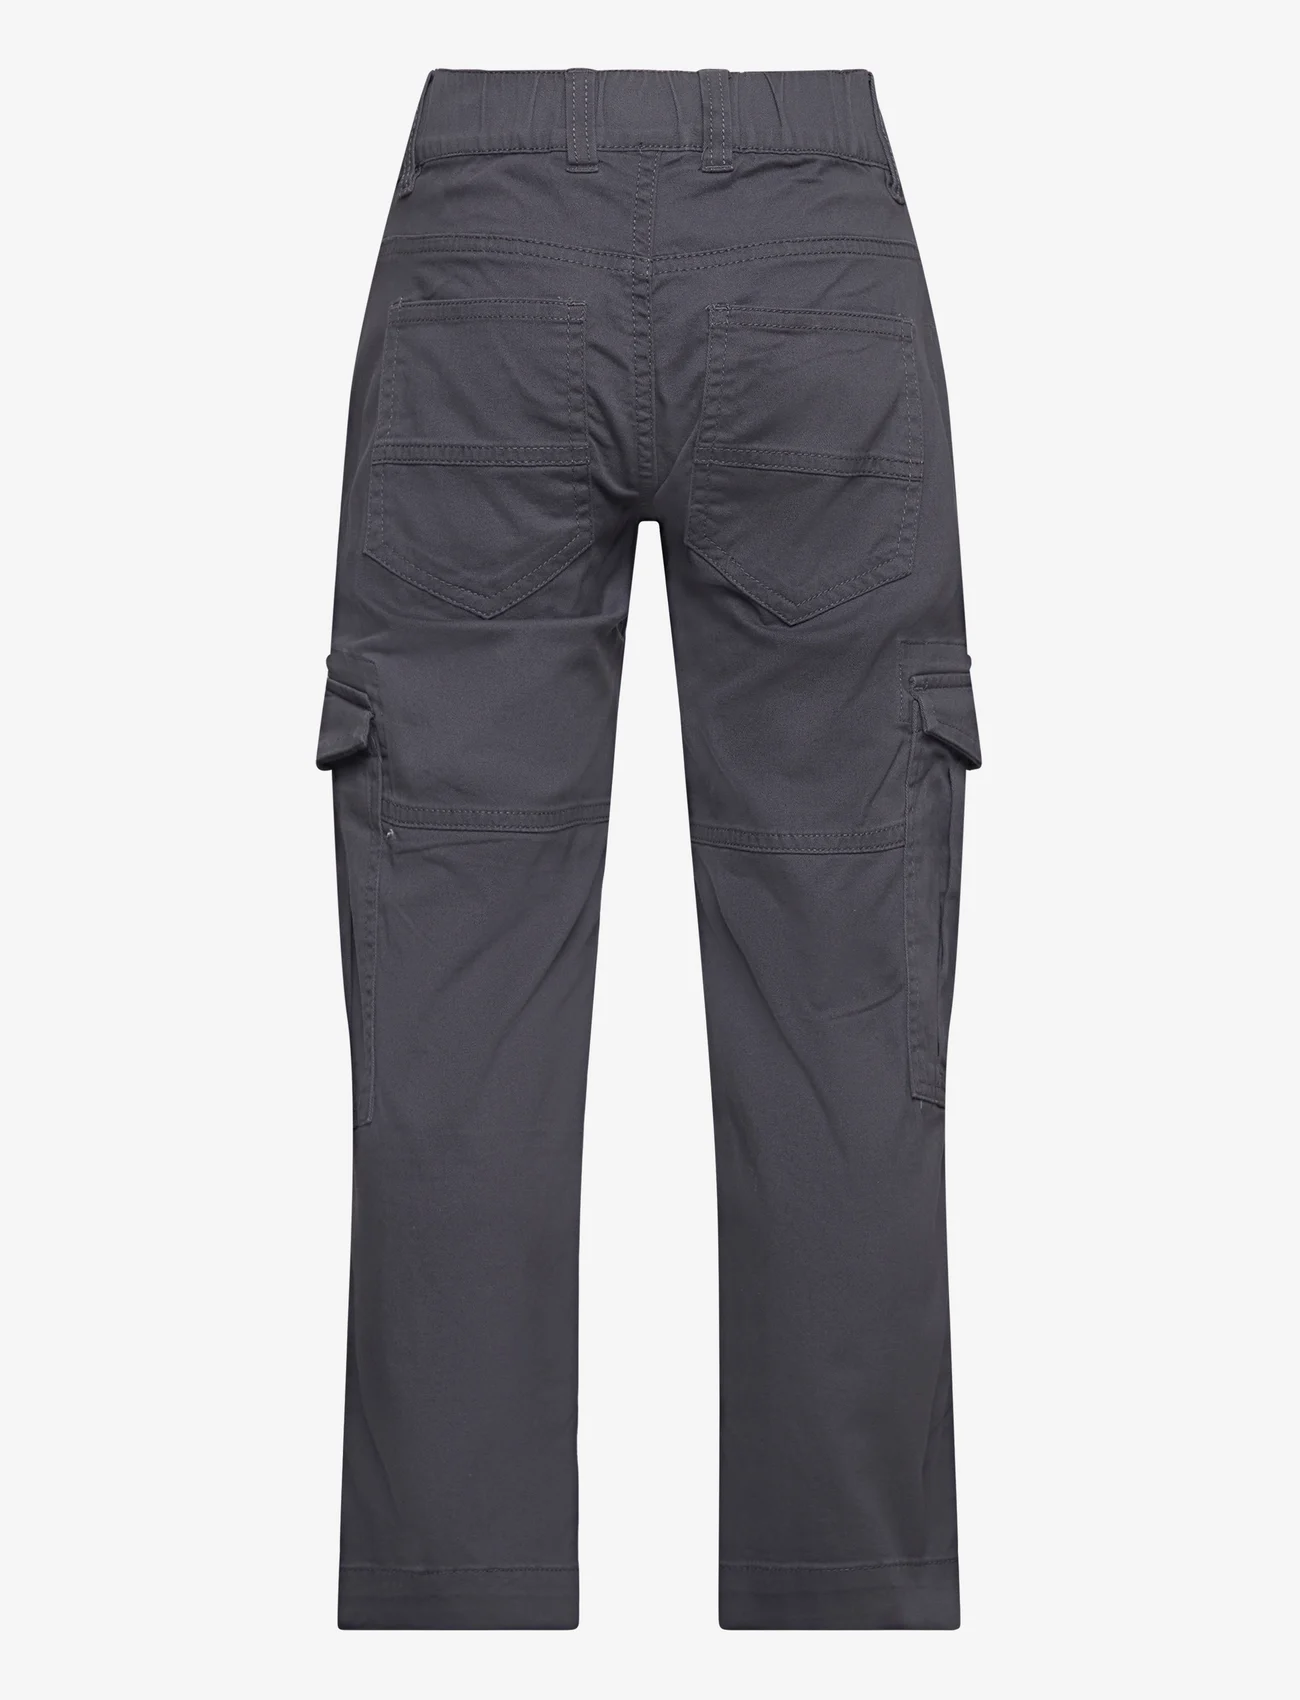 Tom Tailor - cargo pants - lowest prices - coal grey - 1